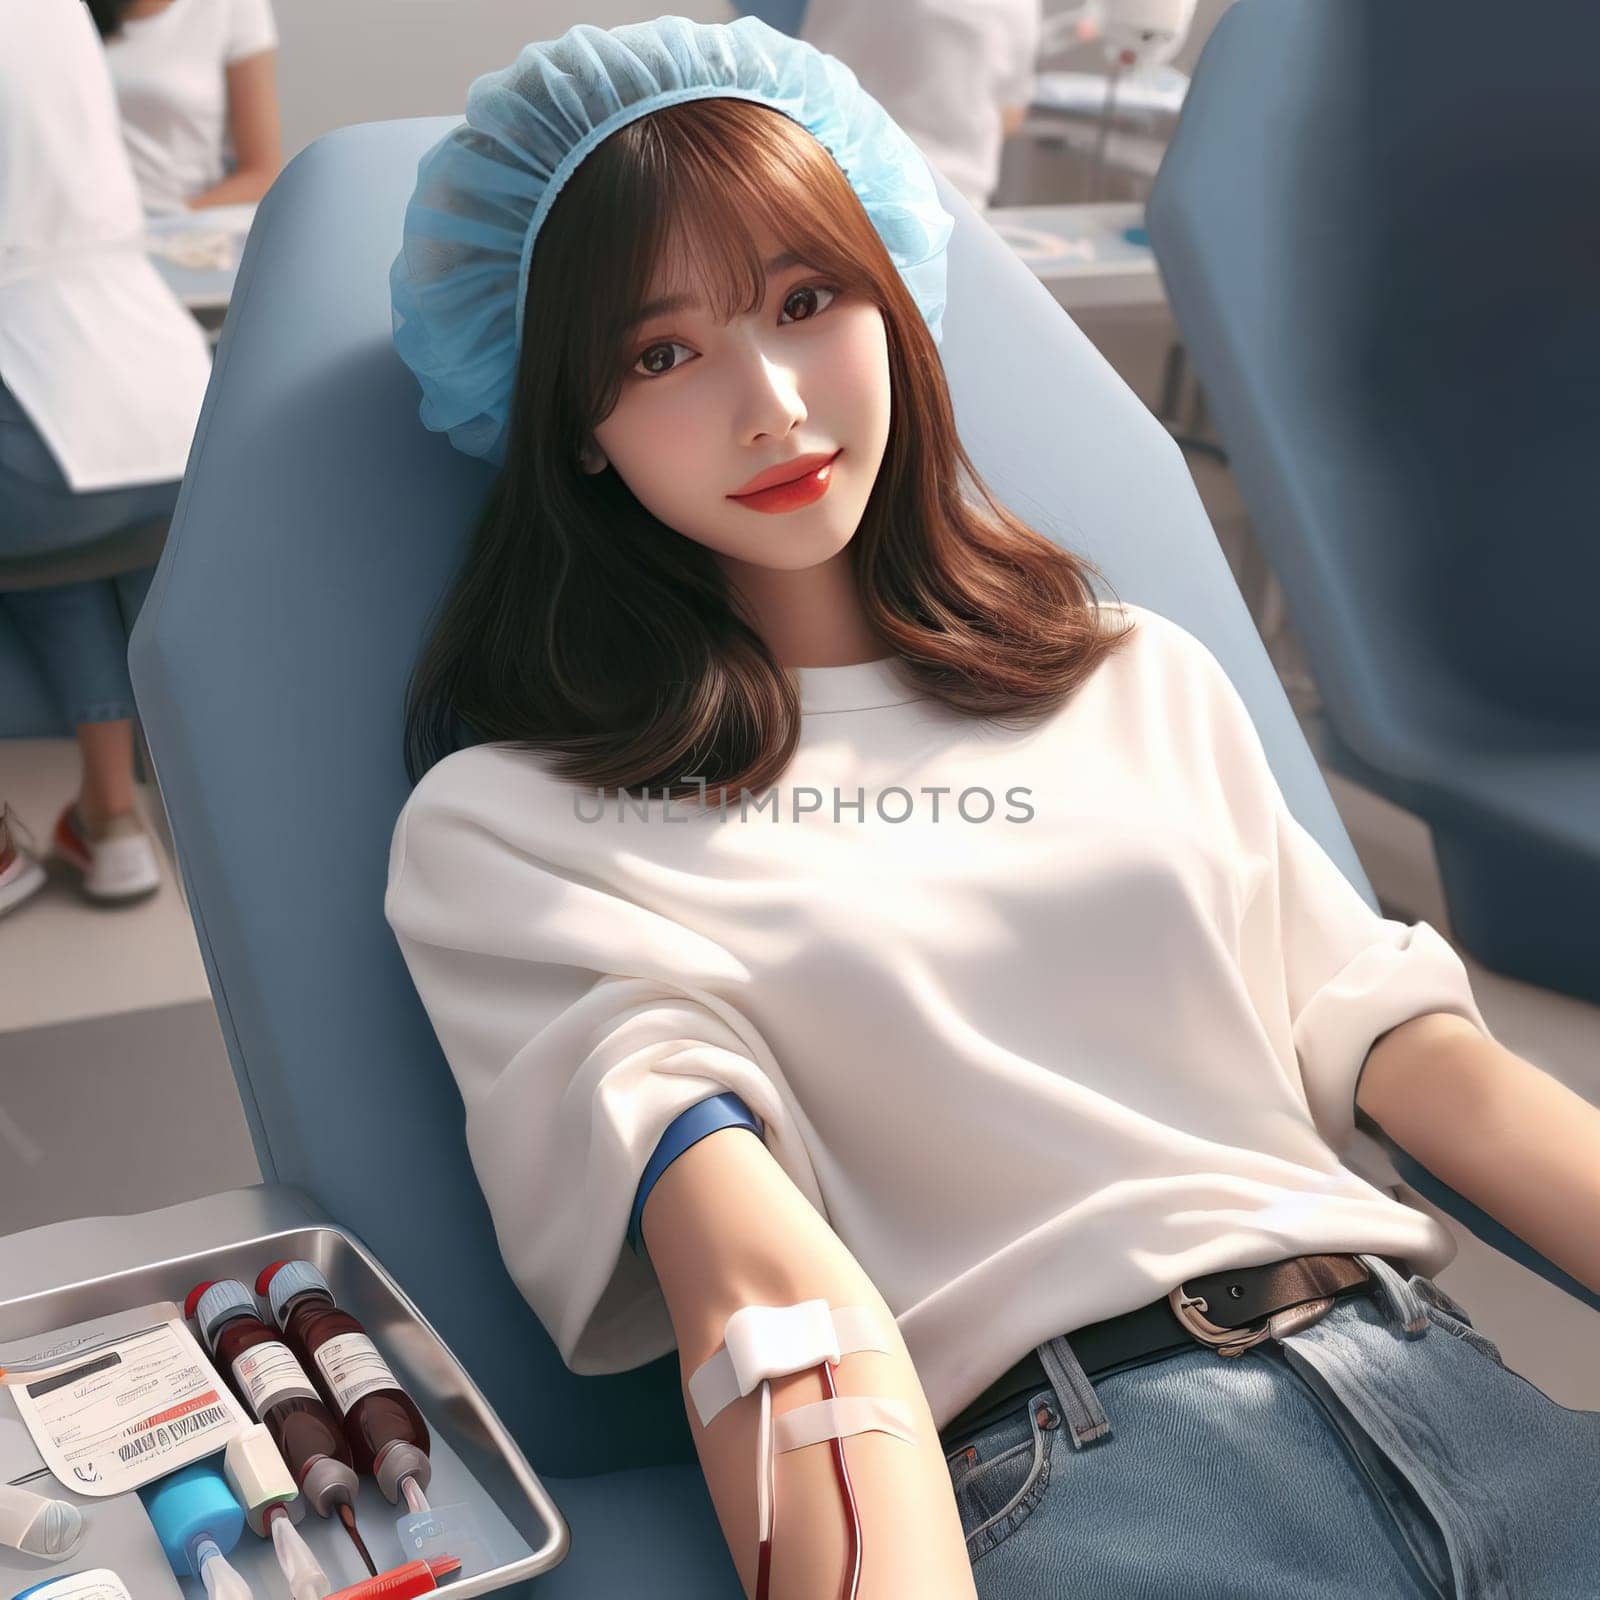 A young asian woman is donating blood in a medical facility. She is wearing a white shirt and blue jeans and is sitting in a blue chair with a tray of blood vials next to her